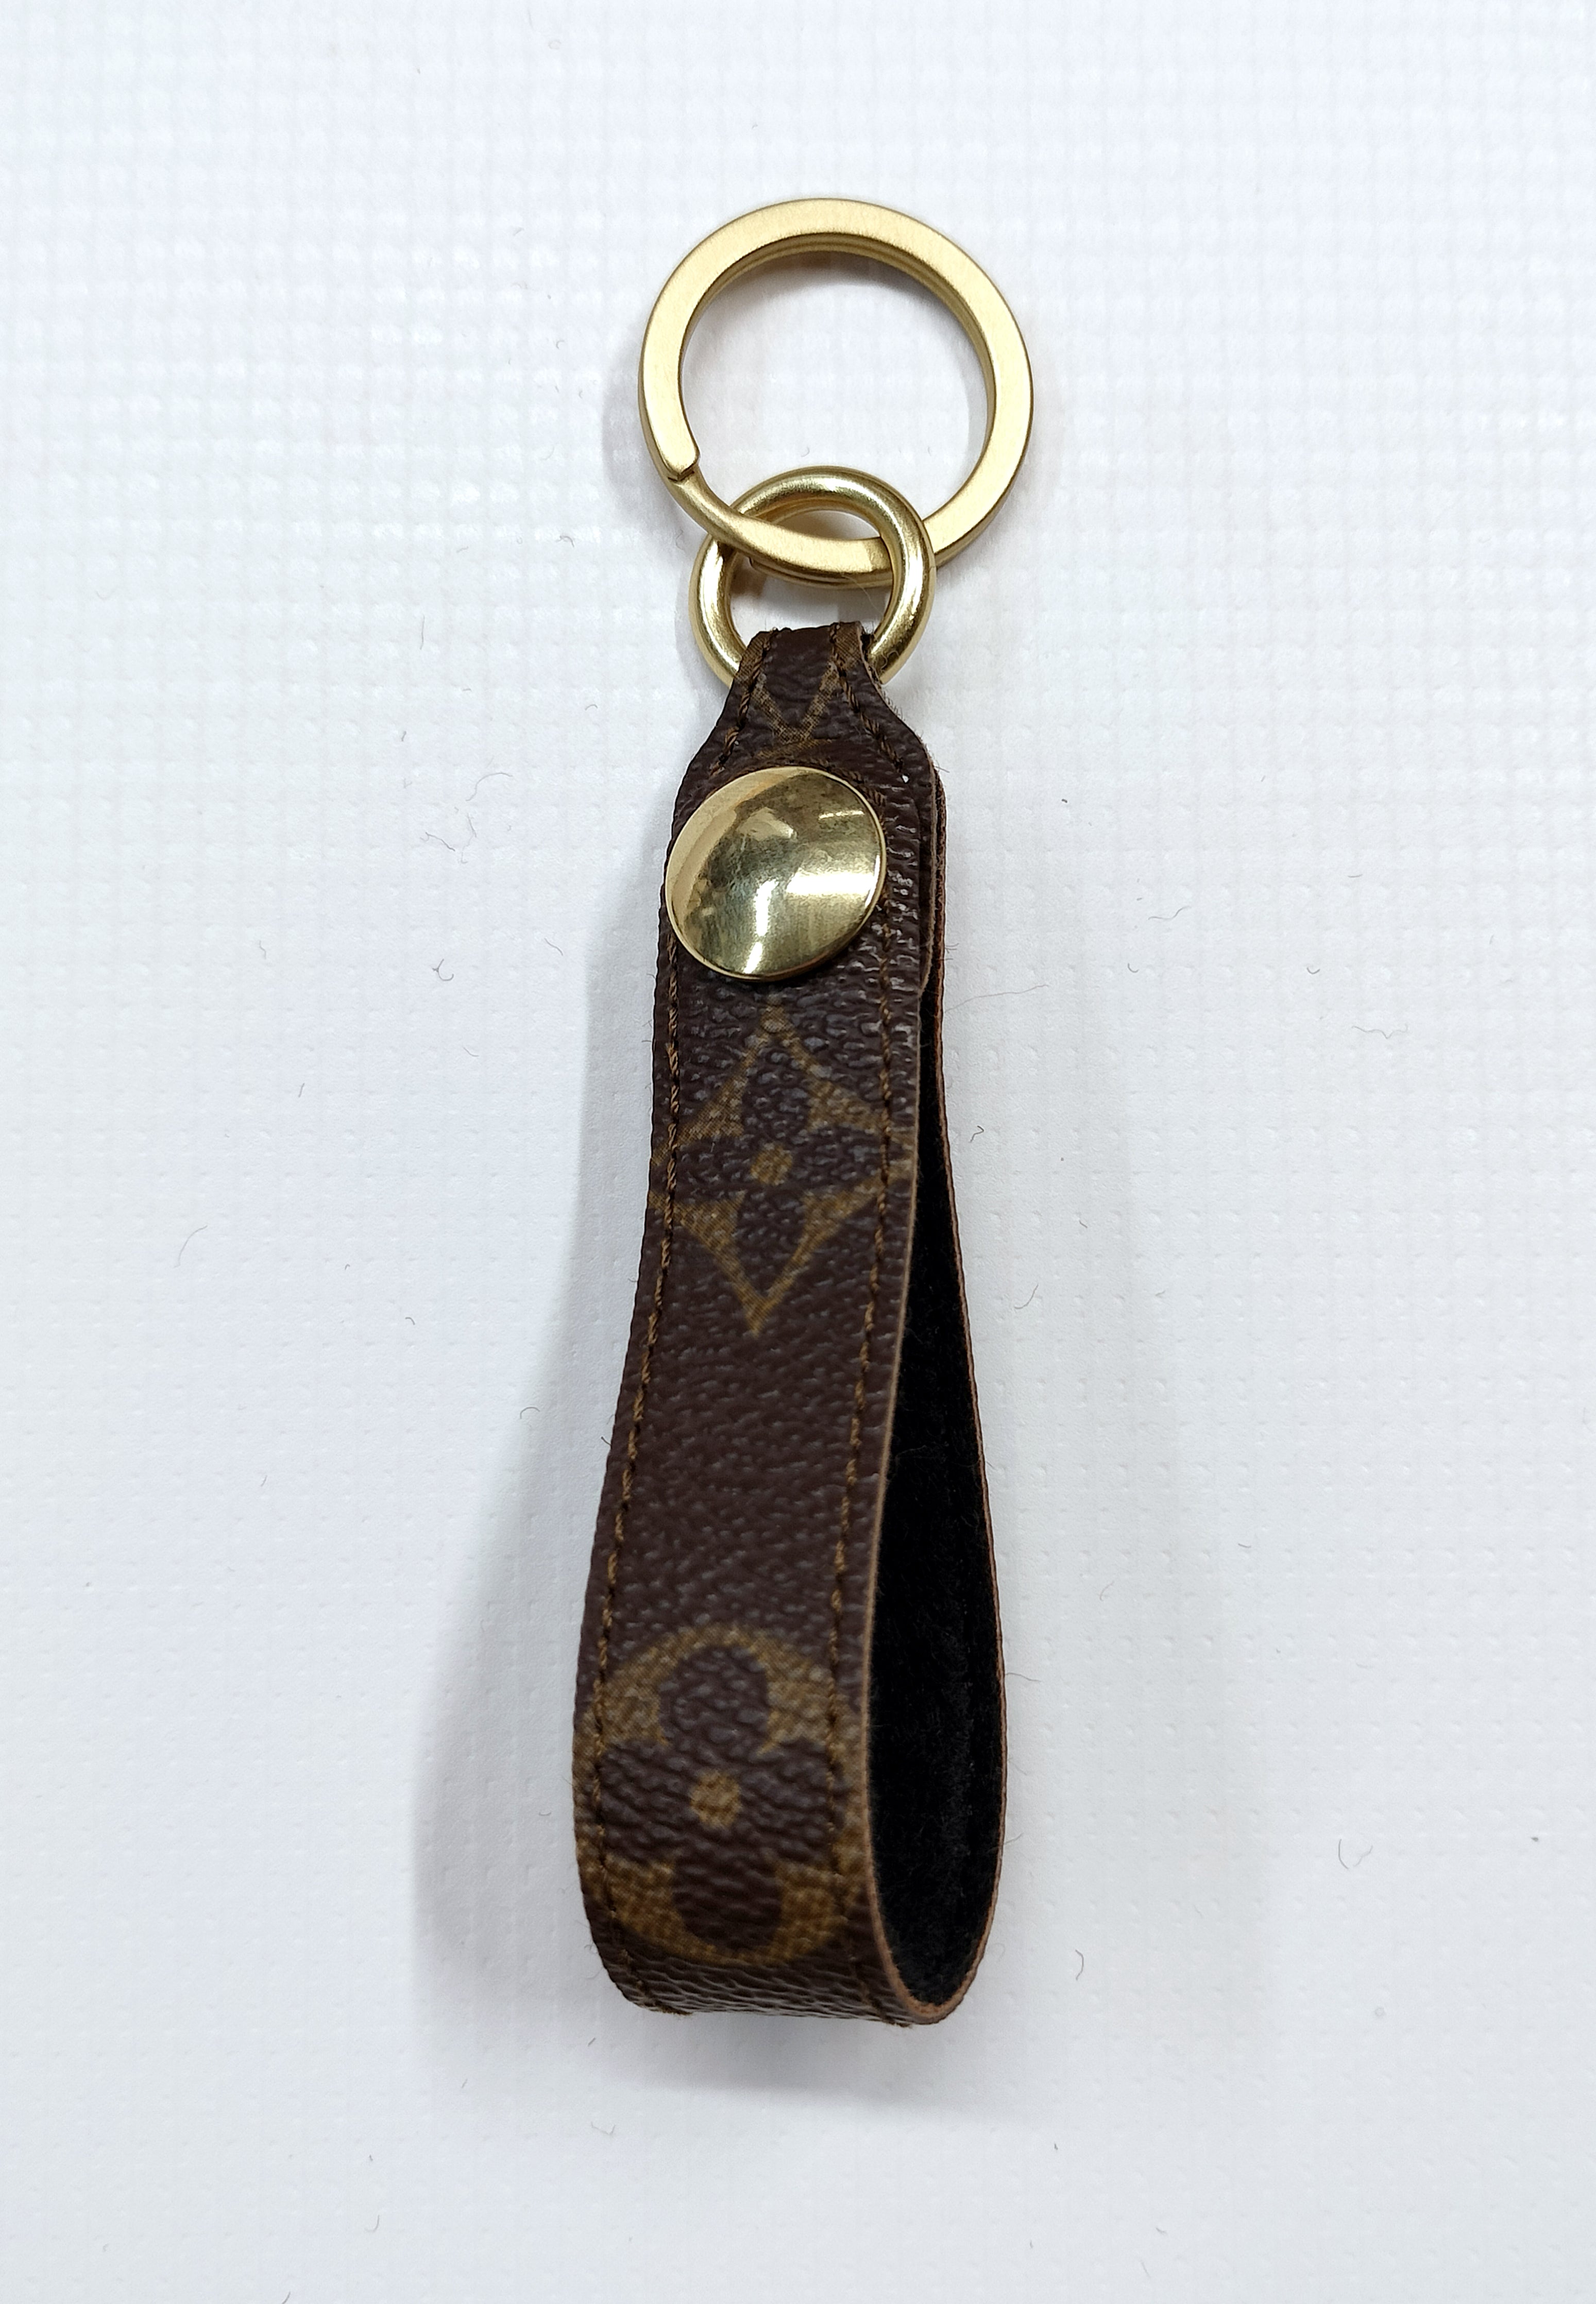 Repurposed/Upcycled Louis Vuitton Keychain